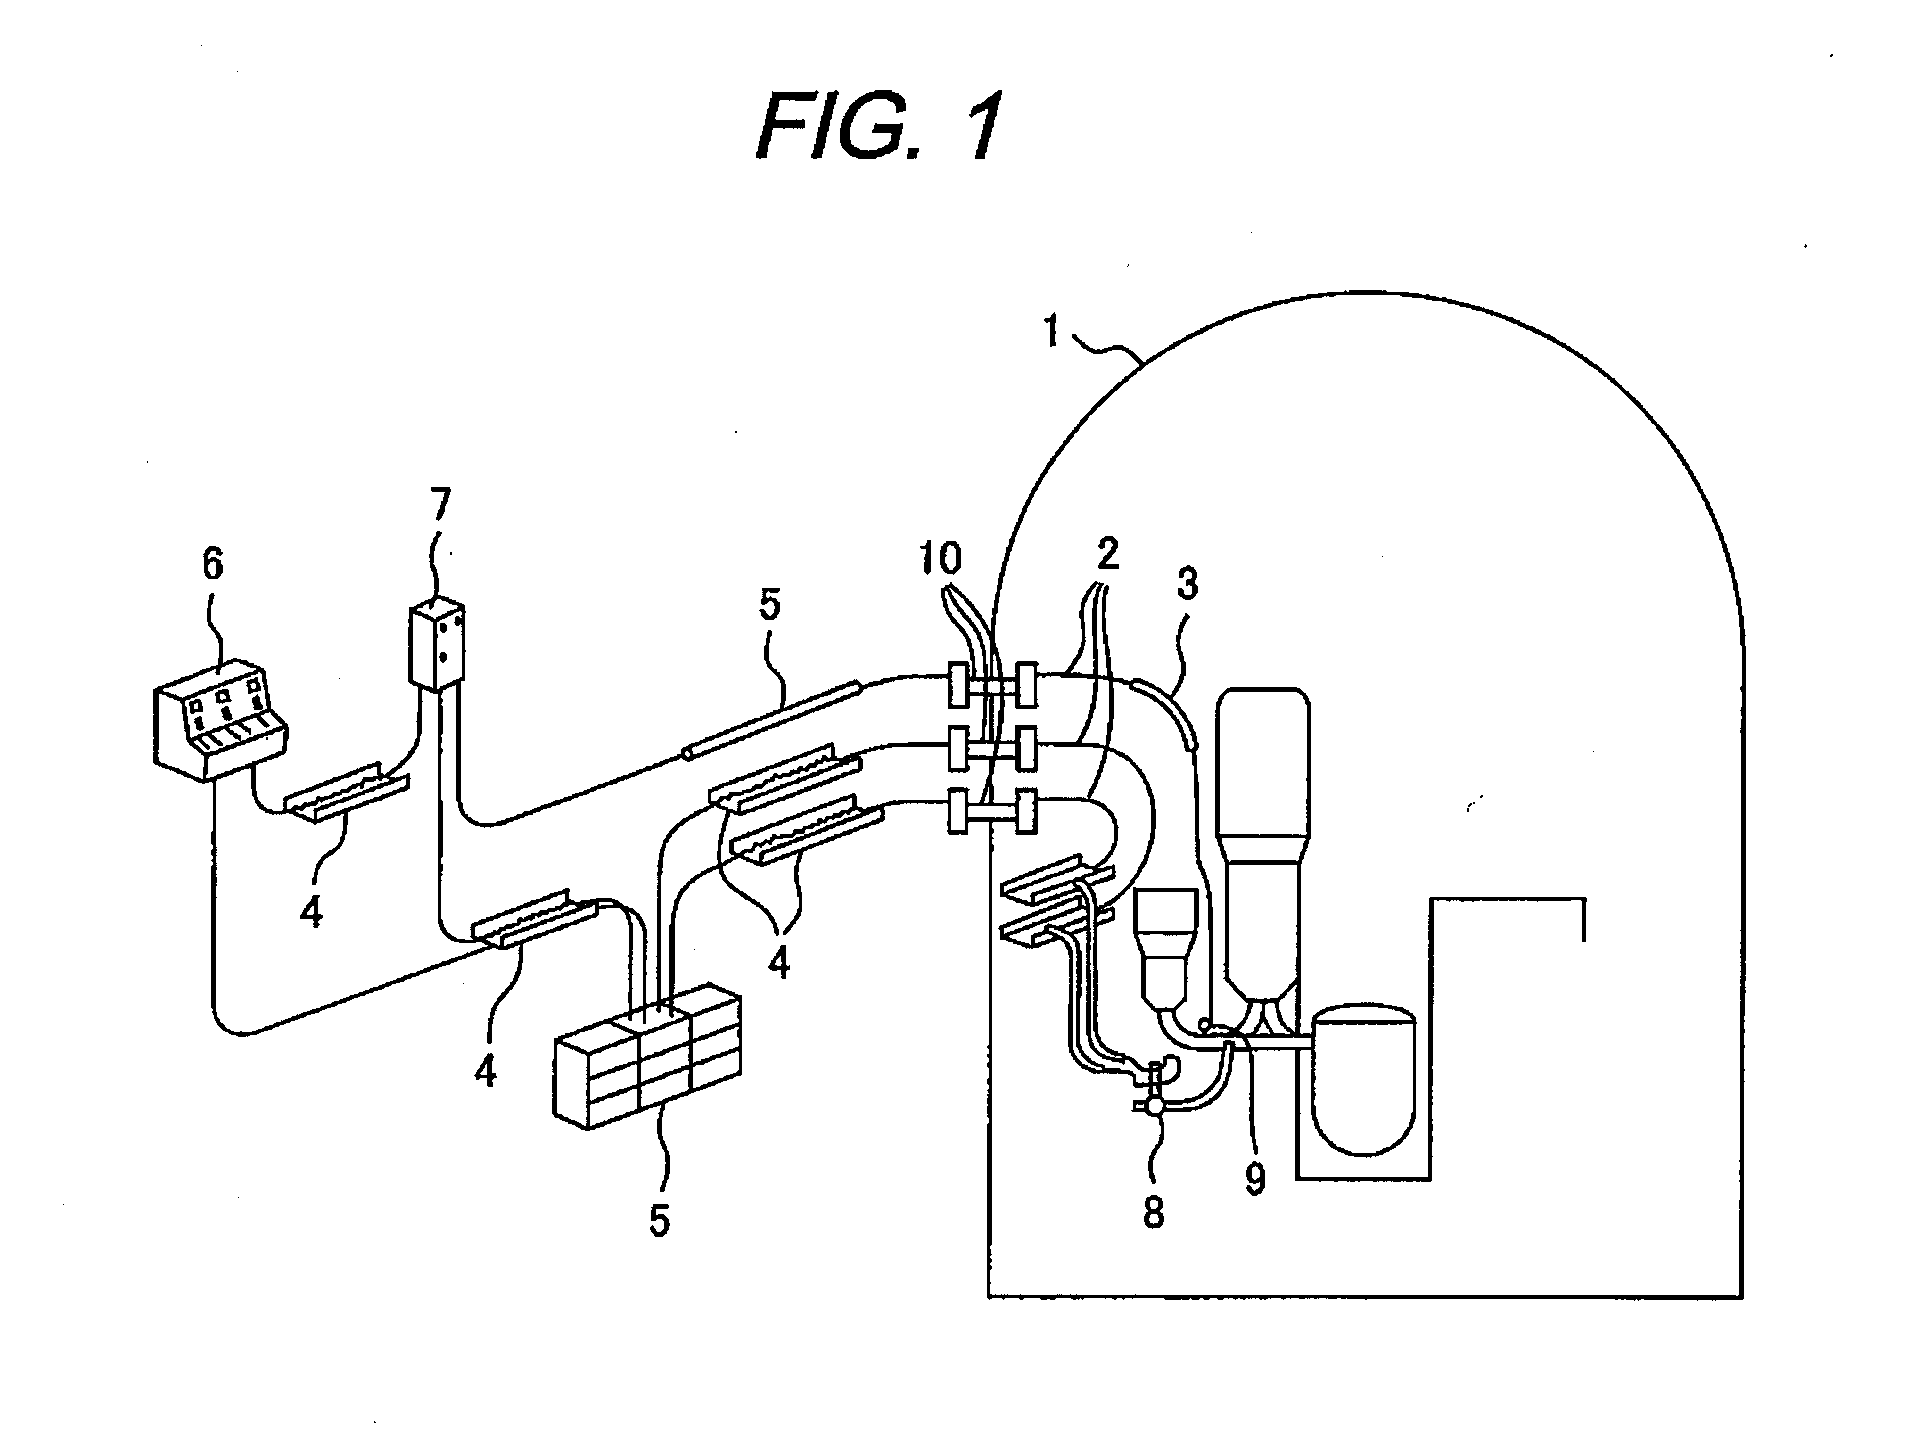 Method for Evaluating Life of Cable Insulating Coating Material